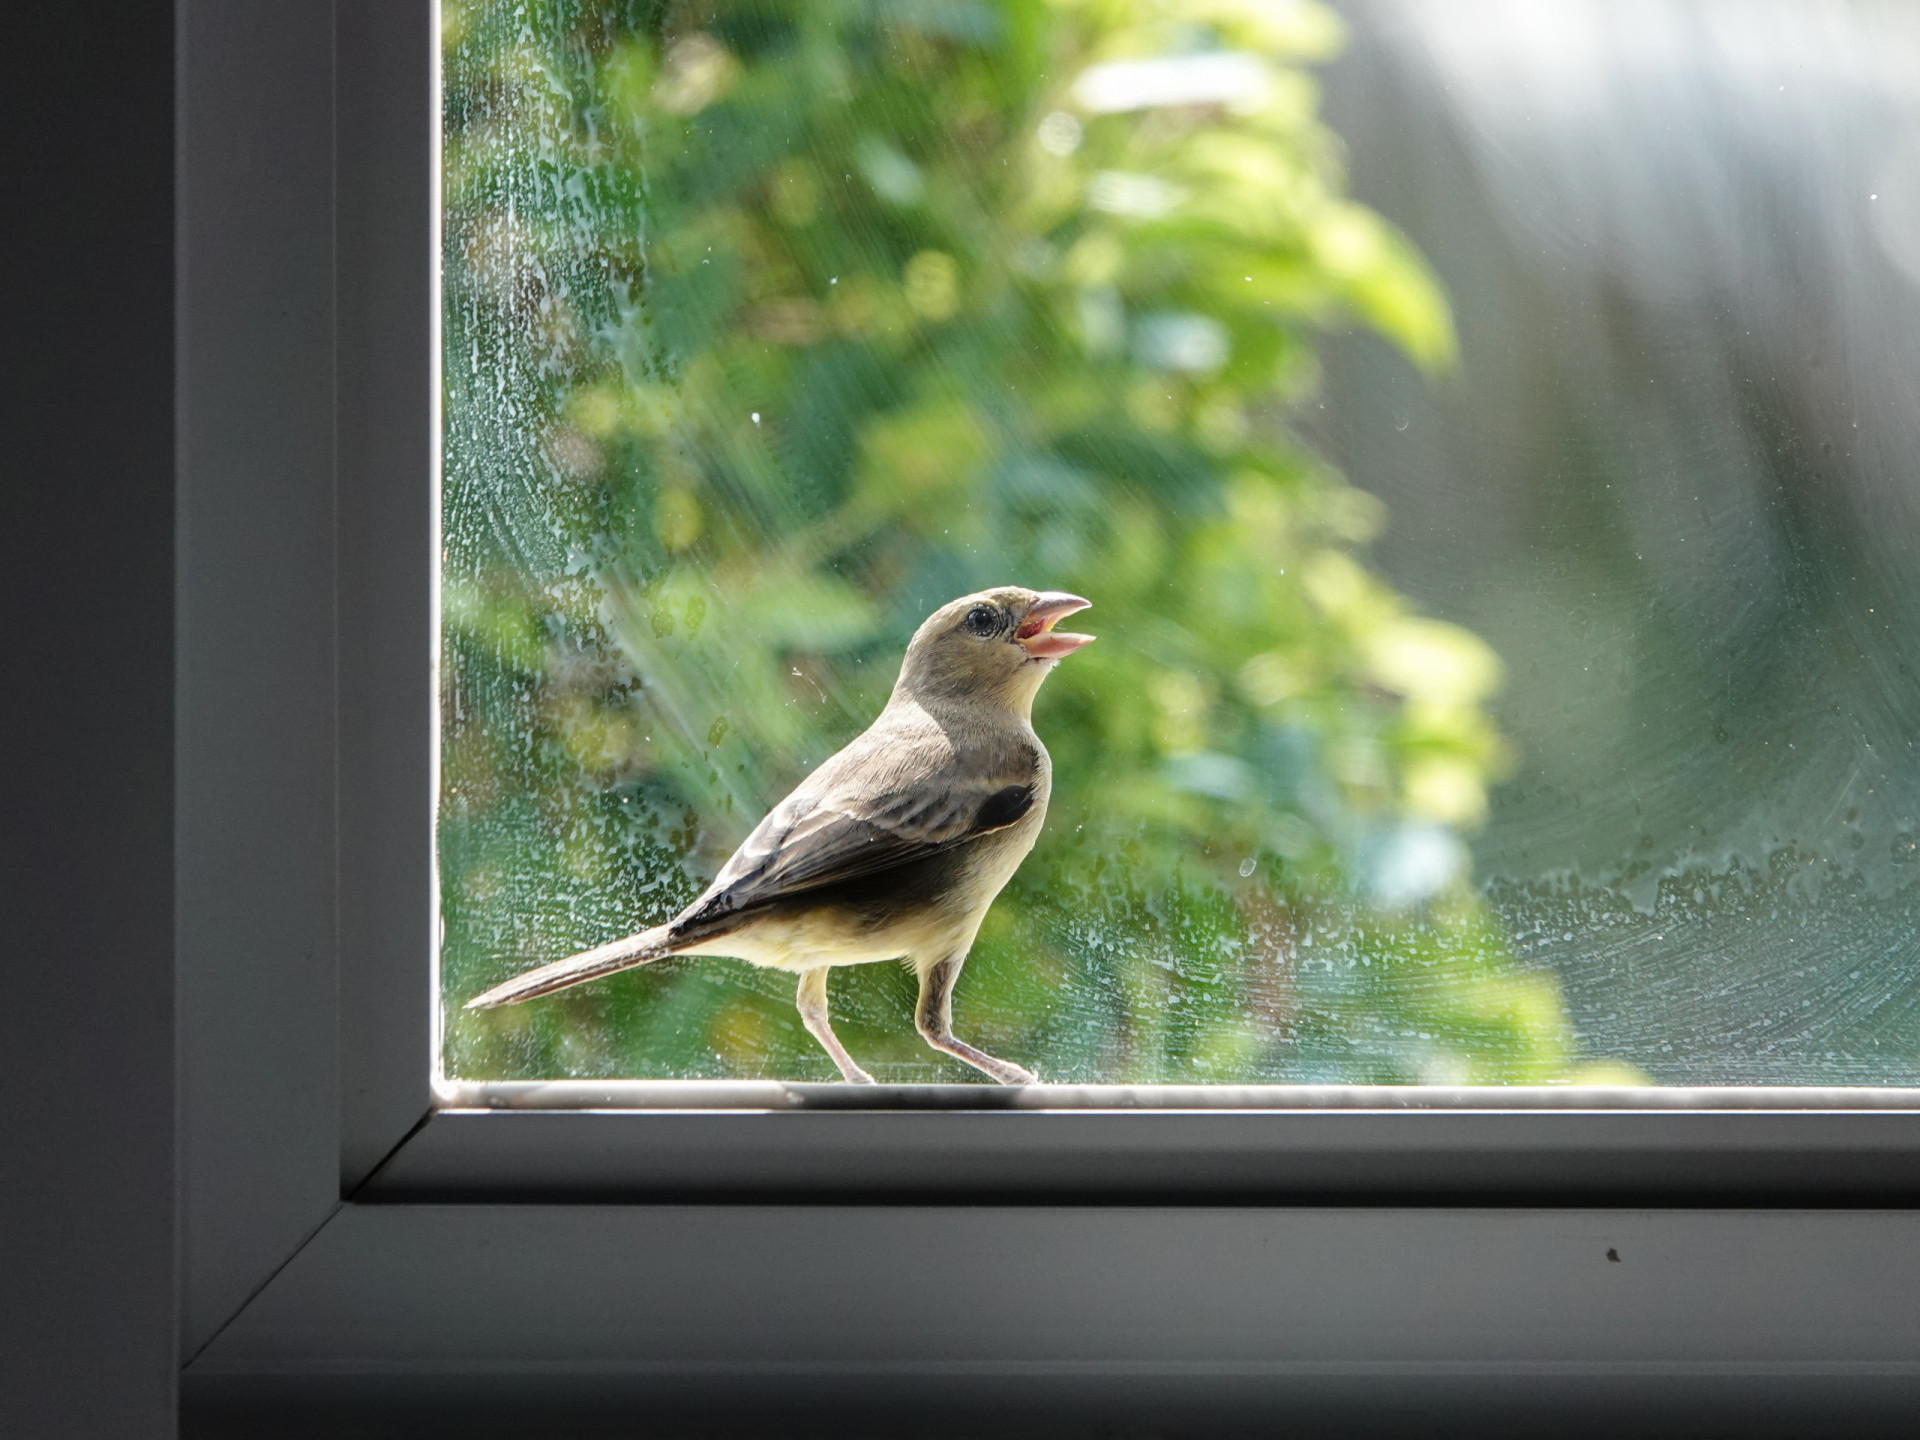 <p>Come on, who can go to work and leave a bird loose at home?</p><p><a href="https://www.msn.com/en-us/community/channel/vid-7xx8mnucu55yw63we9va2gwr7uihbxwc68fxqp25x6tg4ftibpra?cvid=94631541bc0f4f89bfd59158d696ad7e">Follow us and access great exclusive content every day</a></p>